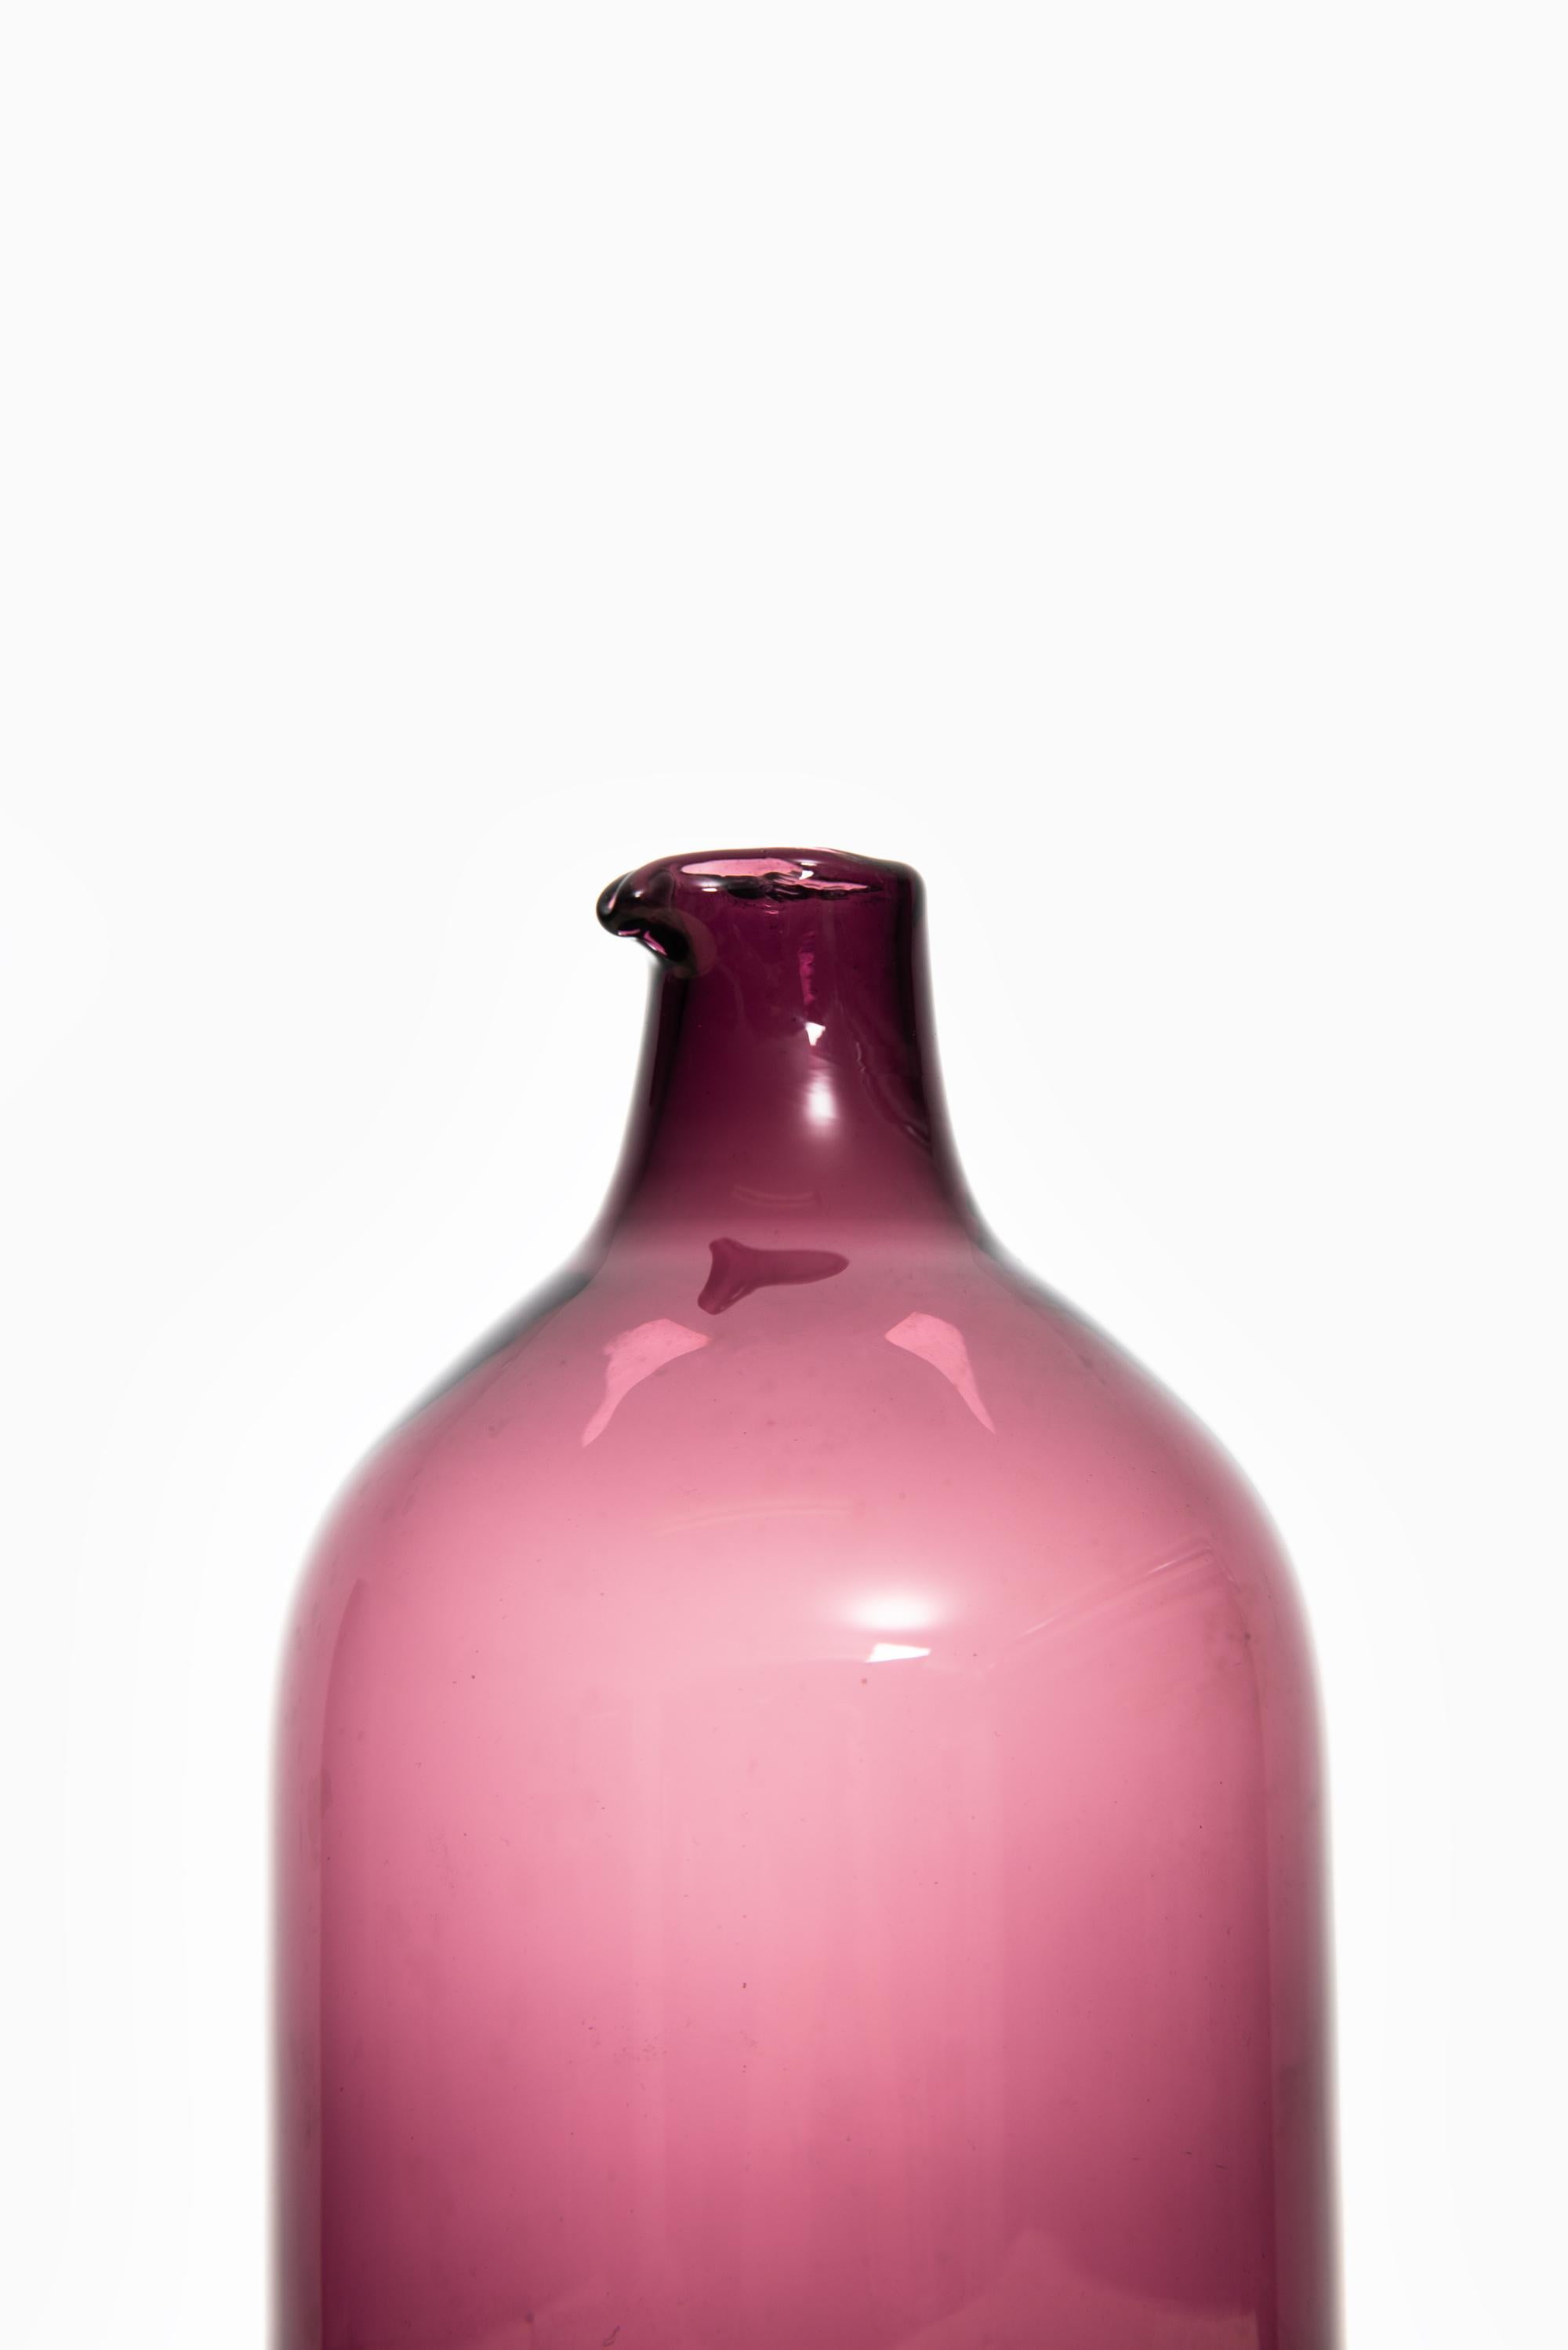 Glass bottle or vase model Pullo or Bird vase designed by Timo Sarpaneva. Produced by Iittala in Finland.